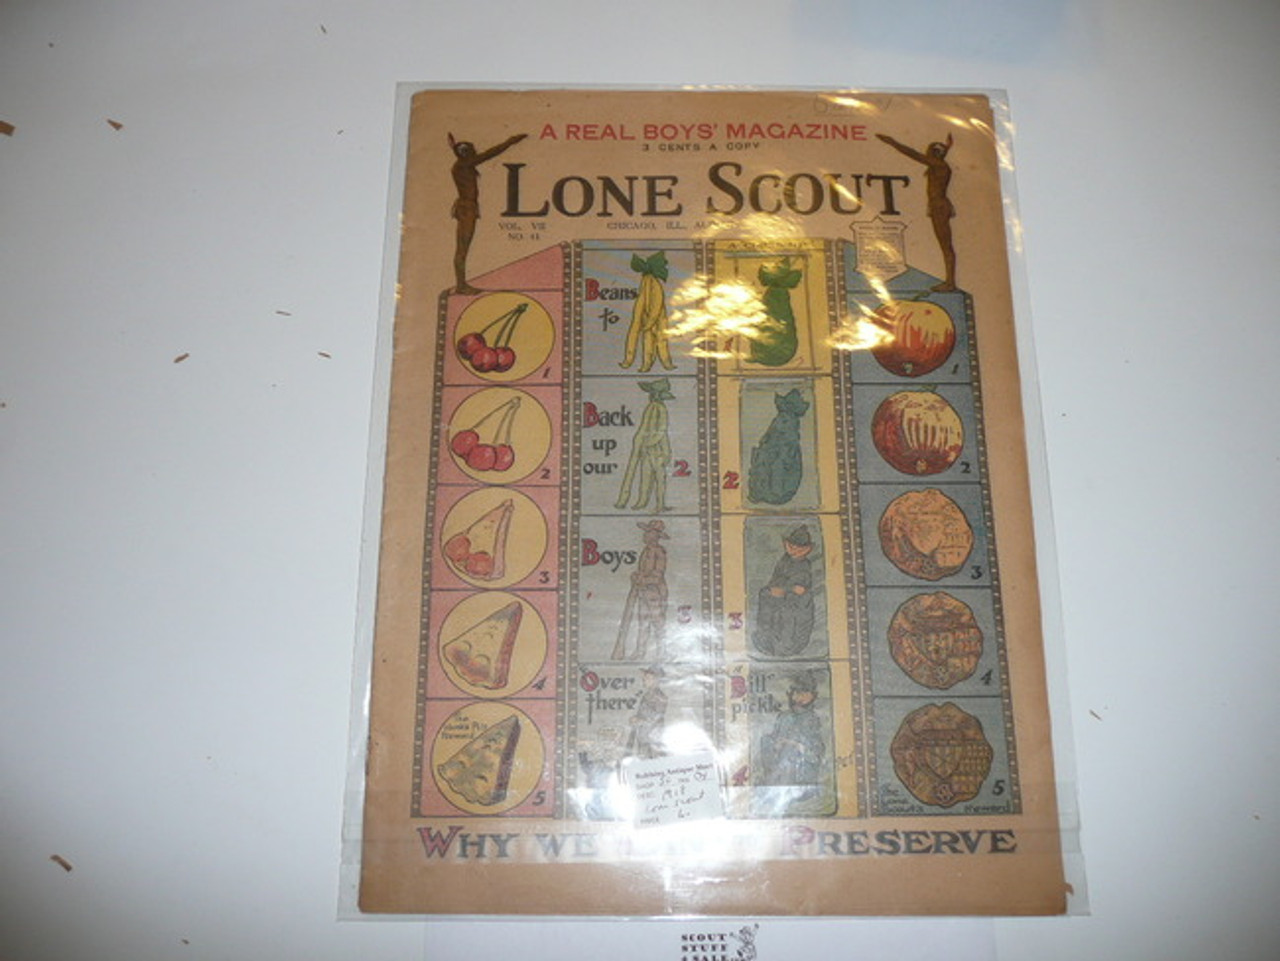 1918 Lone Scout Magazine, August 03, Vol 7 #41